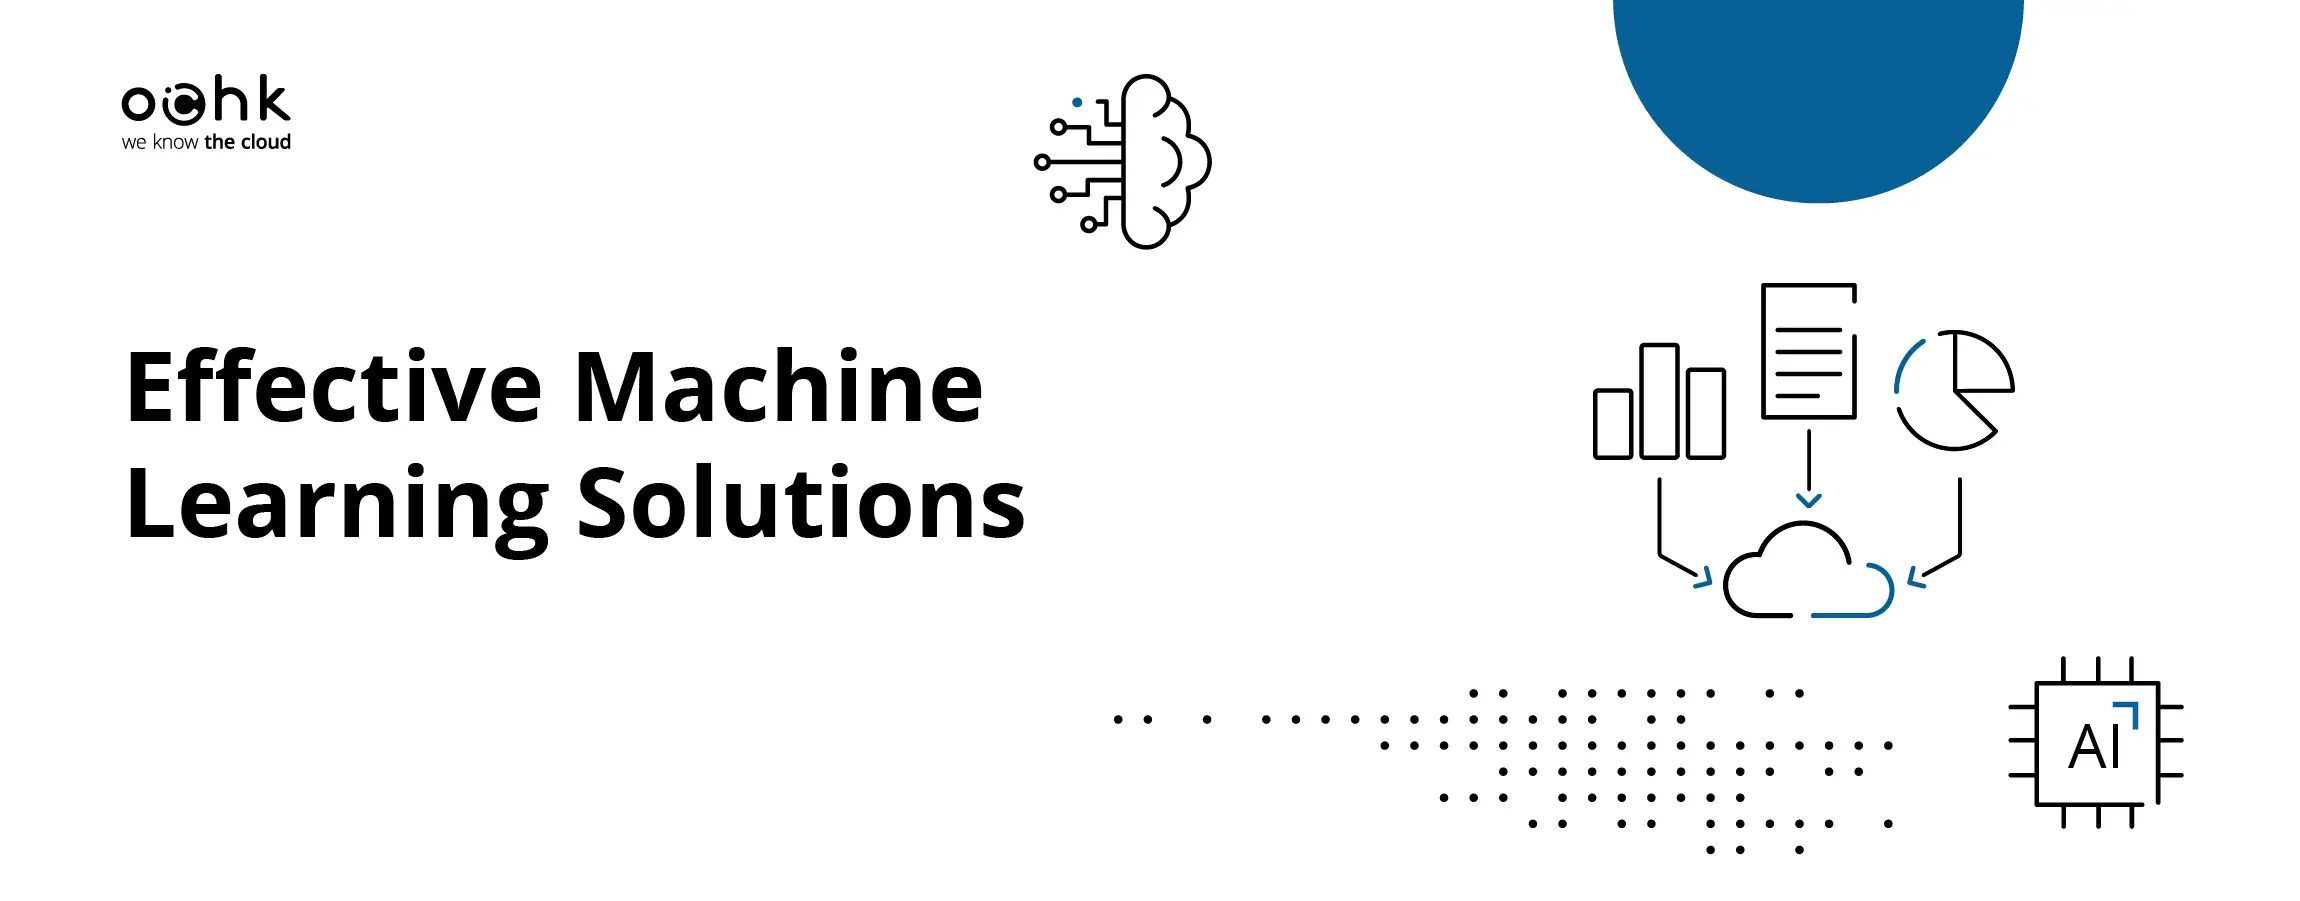 How to Build Effective Machine Learning Solutions in 3 Steps